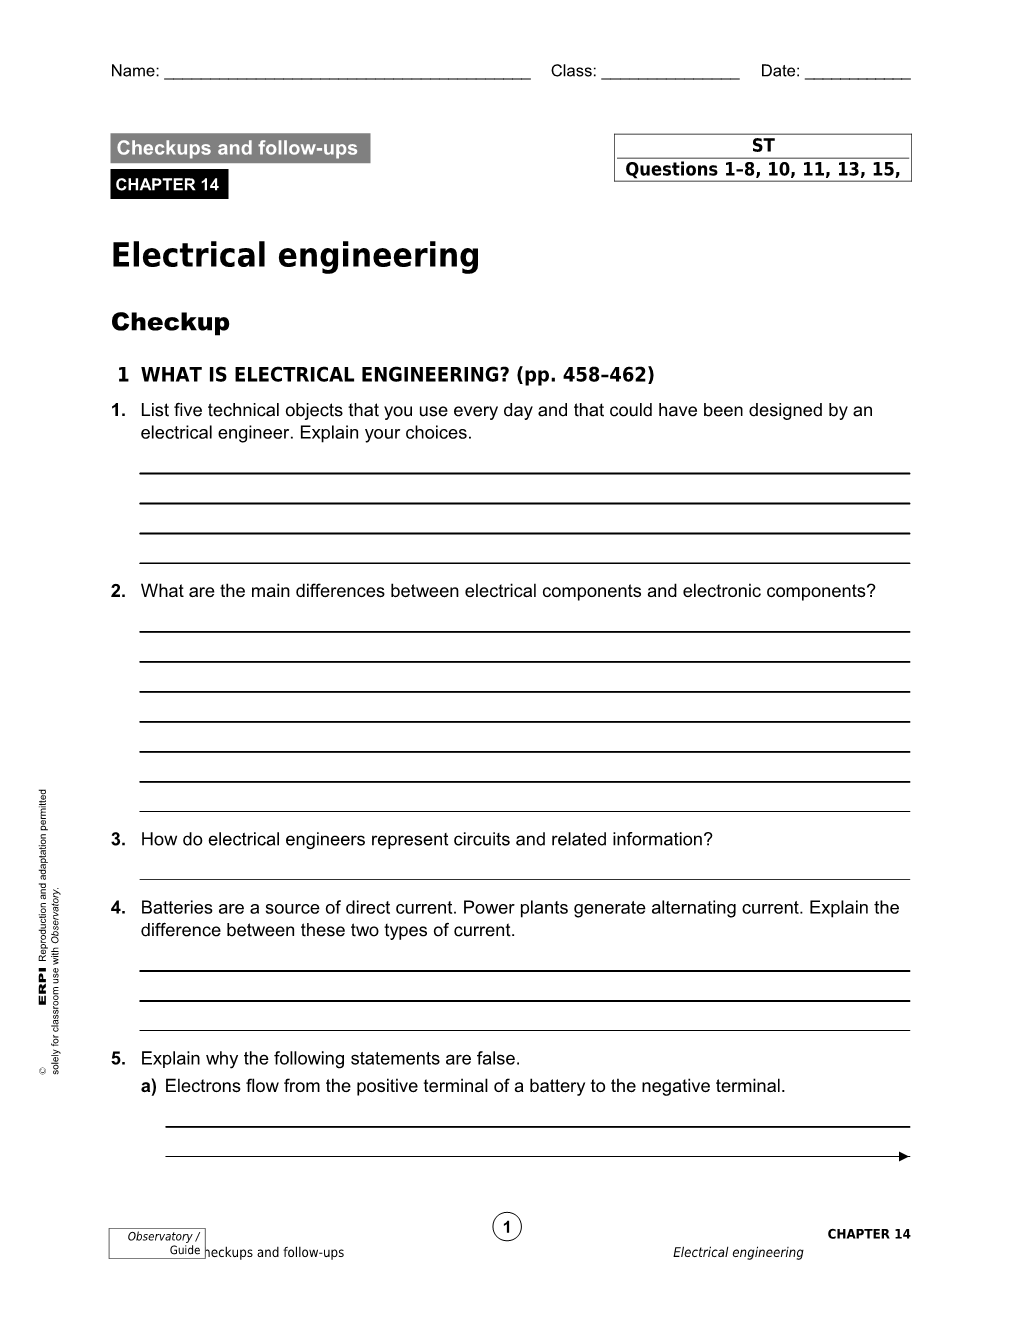 1 WHAT IS ELECTRICAL ENGINEERING?(Pp. 458 462)